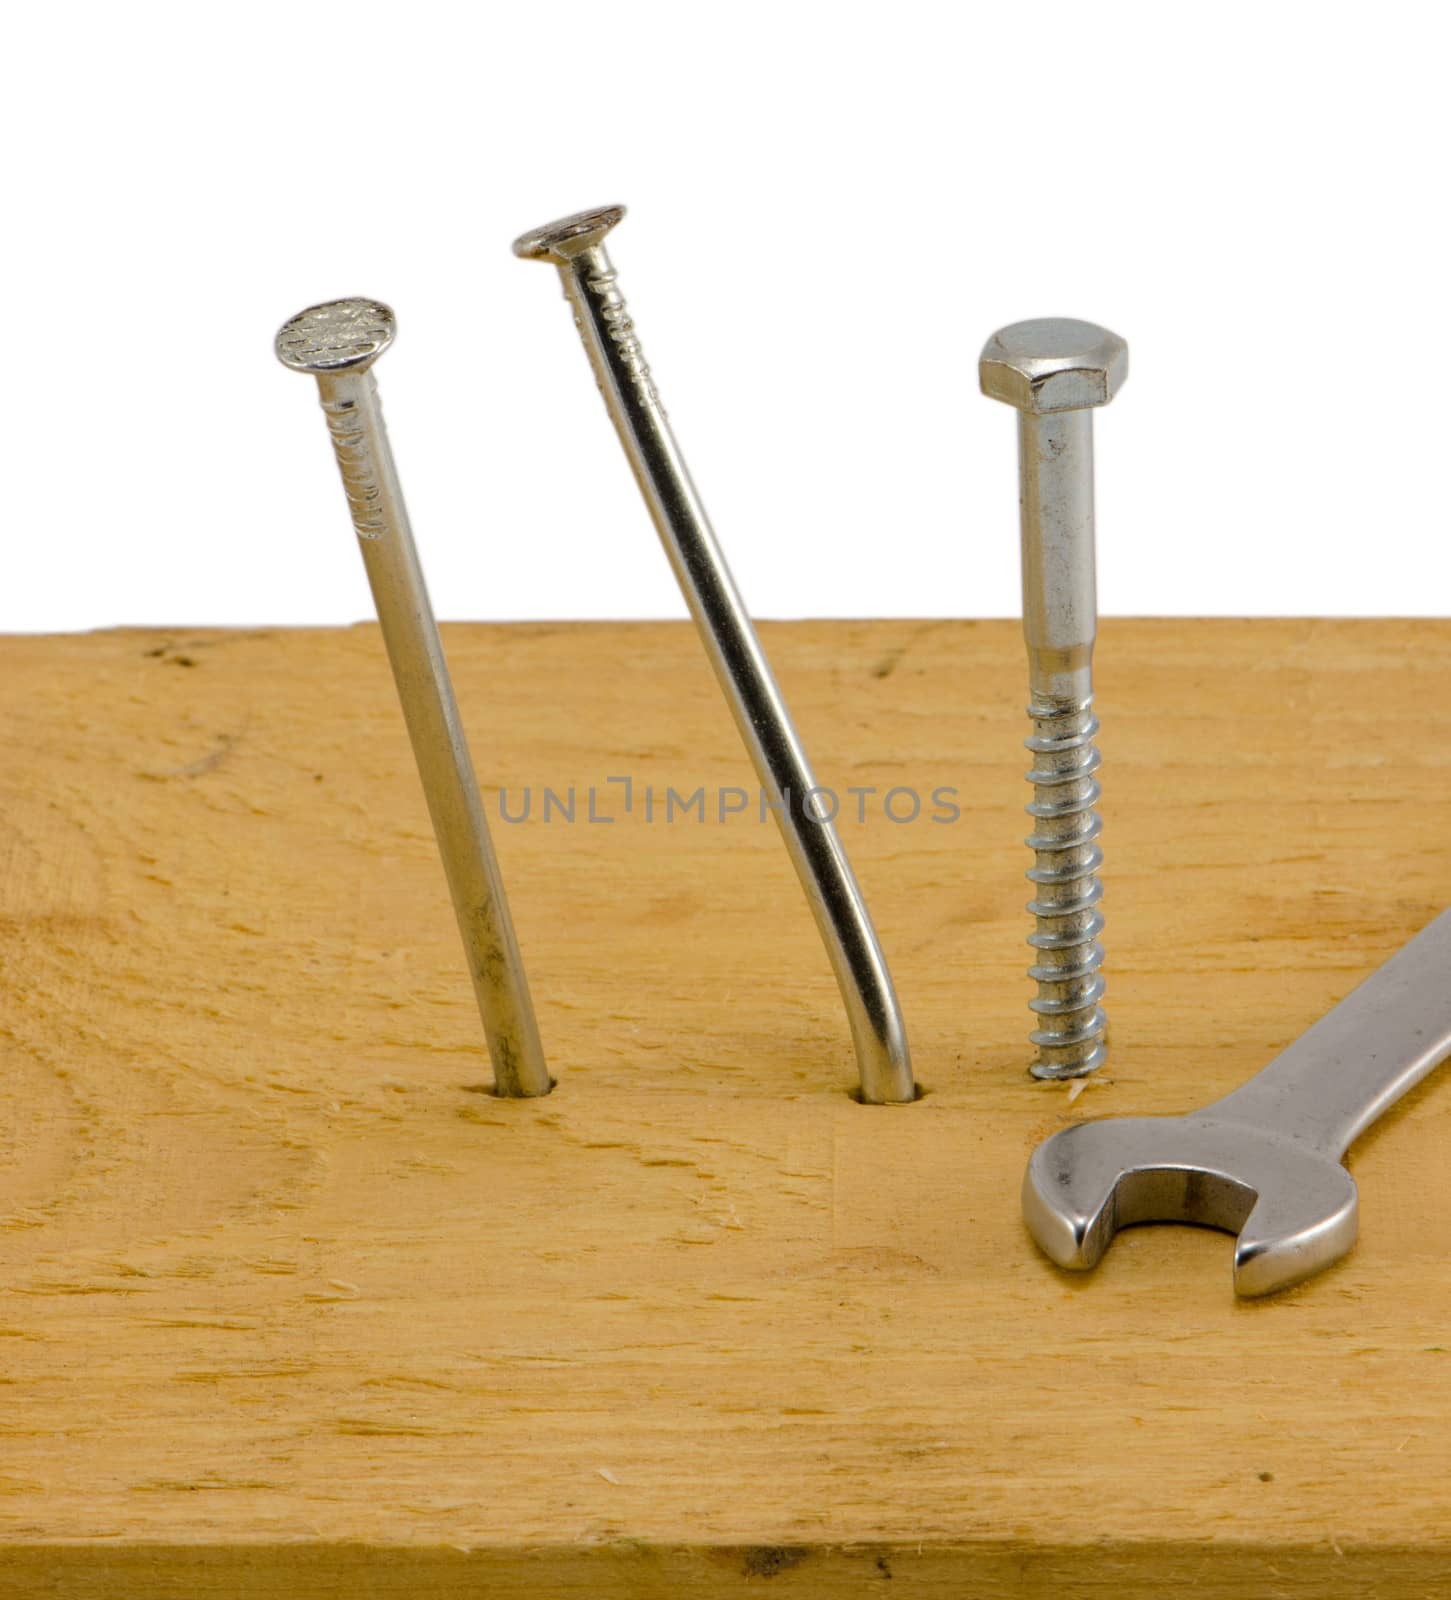 bend hammered nails board screw bolt wrench white by sauletas